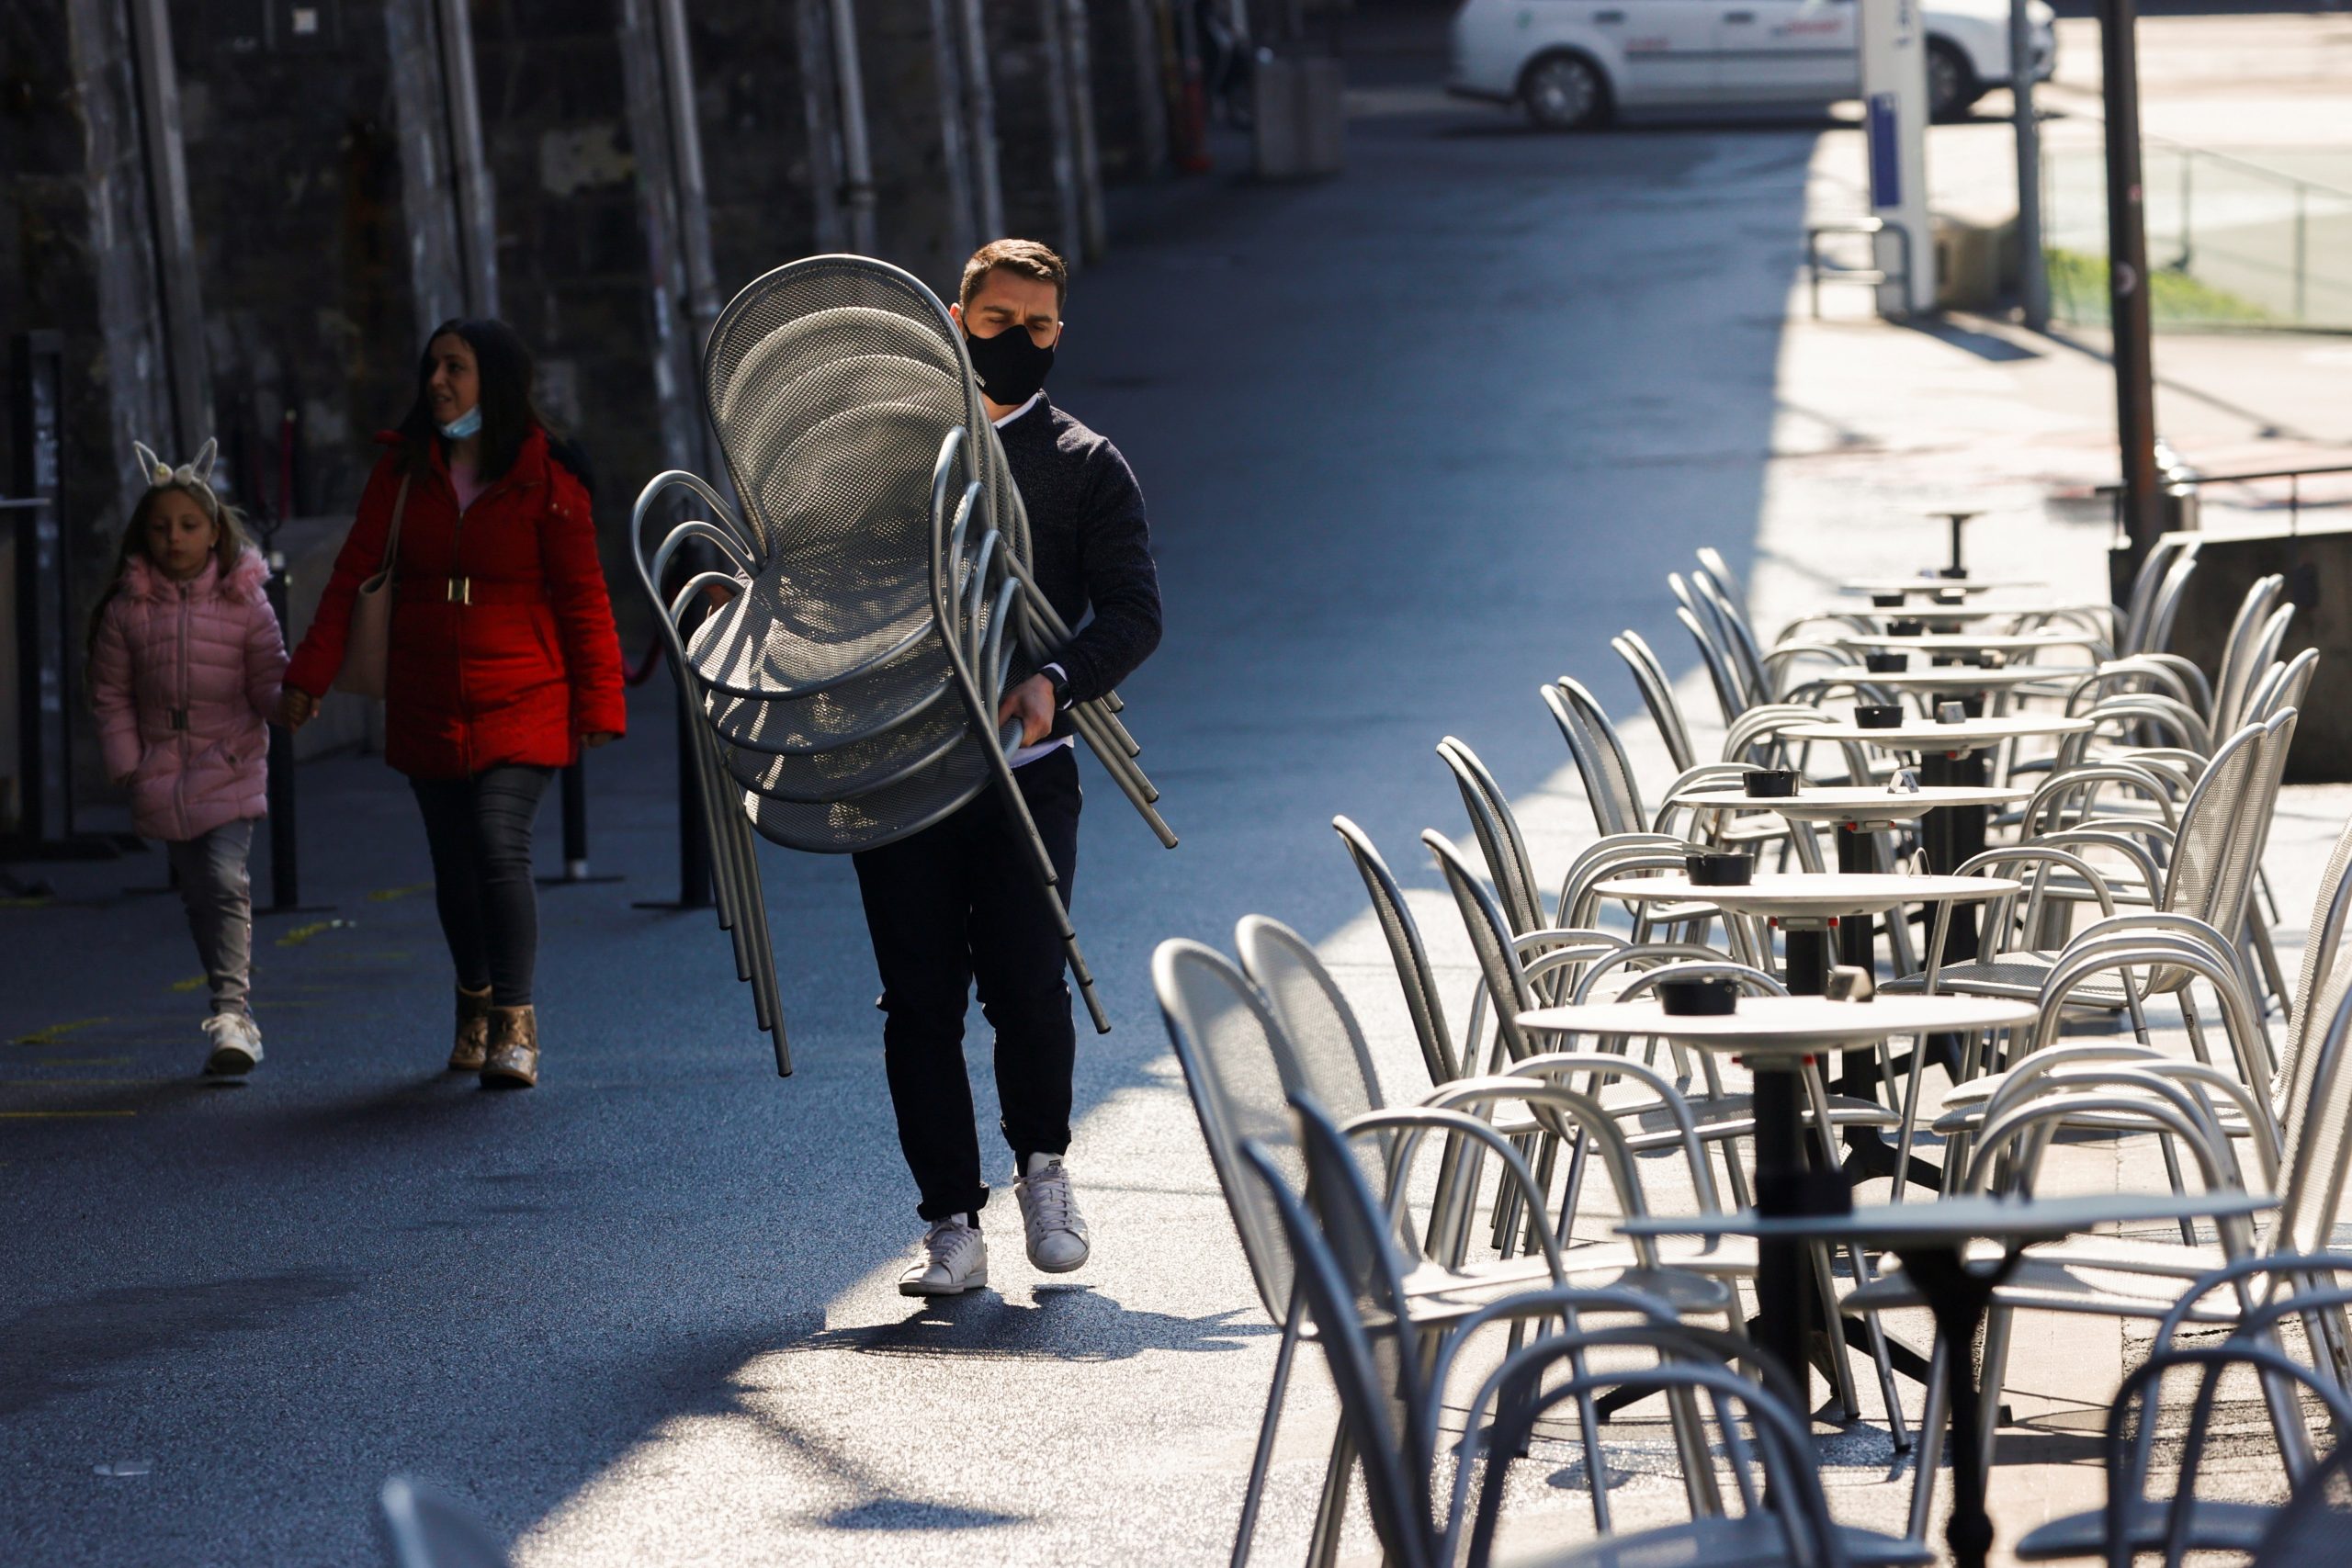 FILE PHOTO: A worker carries chairs at Les Arches bar in the city centre, as coronavirus disease (COVID-19) lockdown restrictions ease, in Lausanne, Switzerland April 19, 2021 FILE PHOTO: A worker carries chairs at Les Arches bar in the city centre, as coronavirus disease (COVID-19) lockdown restrictions ease, in Lausanne, Switzerland April 19, 2021. REUTERS/Denis Balibouse/File Photo DENIS BALIBOUSE